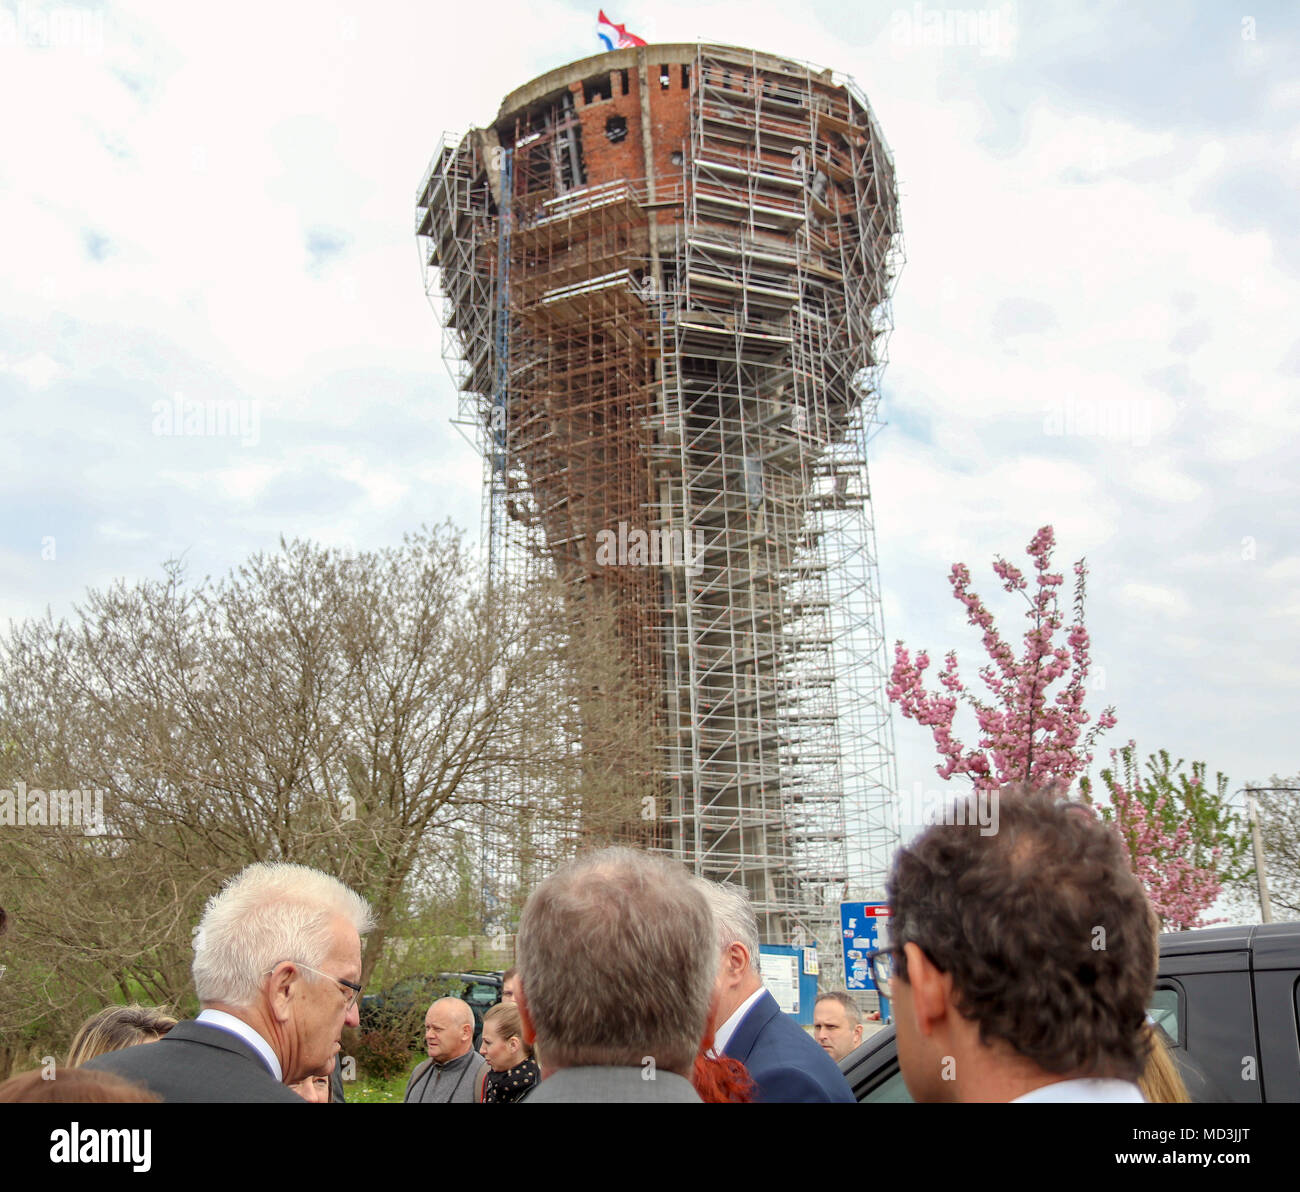 HANDOUT - 18 April 2018, Croatia, Vukovar: Winfried Kretschmann (L) of Alliance 90/The Greens, Premier of Baden-Wuerttemberg, stands in front of the water tower in the course of a visiting. Today, the water tower is a civil war memorial and is being expanded as a memorial site. Photo: Jana Höffner/Staatsministerium Baden-Württemberg/dpa - ATTENTION: editorial use only in connection with the latest coverage about (the transmission/the film/the auction/the exhibition/the book) and only if the credit mentioned above is referenced in full Stock Photo